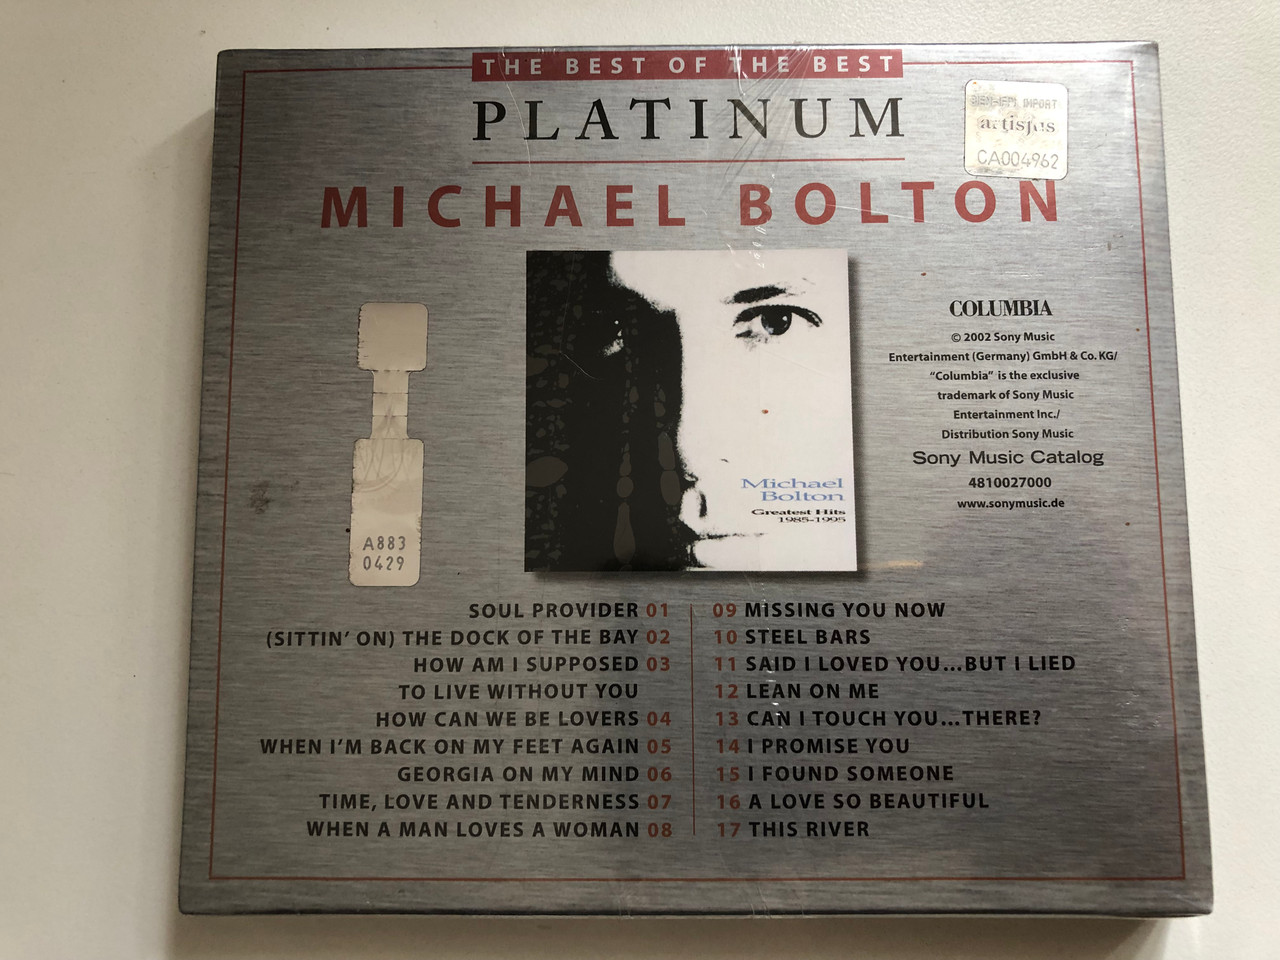 https://cdn10.bigcommerce.com/s-62bdpkt7pb/products/0/images/294769/Michael_Bolton_Greatest_Hits_1985_-_1995_-_The_Best_Of_The_Best_Platinum_Can_I_Touch_You..._There_Georgia_On_My_Mind_How_Am_I_Supposed_To_Live_Without_You_Lean_On_Me_This_River_And_Ma__14551.1692612651.1280.1280.JPG?c=2&_gl=1*gcmchd*_ga*MjA2NTIxMjE2MC4xNTkwNTEyNTMy*_ga_WS2VZYPC6G*MTY5MjYwMjgwOS4xMDM4LjEuMTY5MjYxMjYxMC42MC4wLjA.